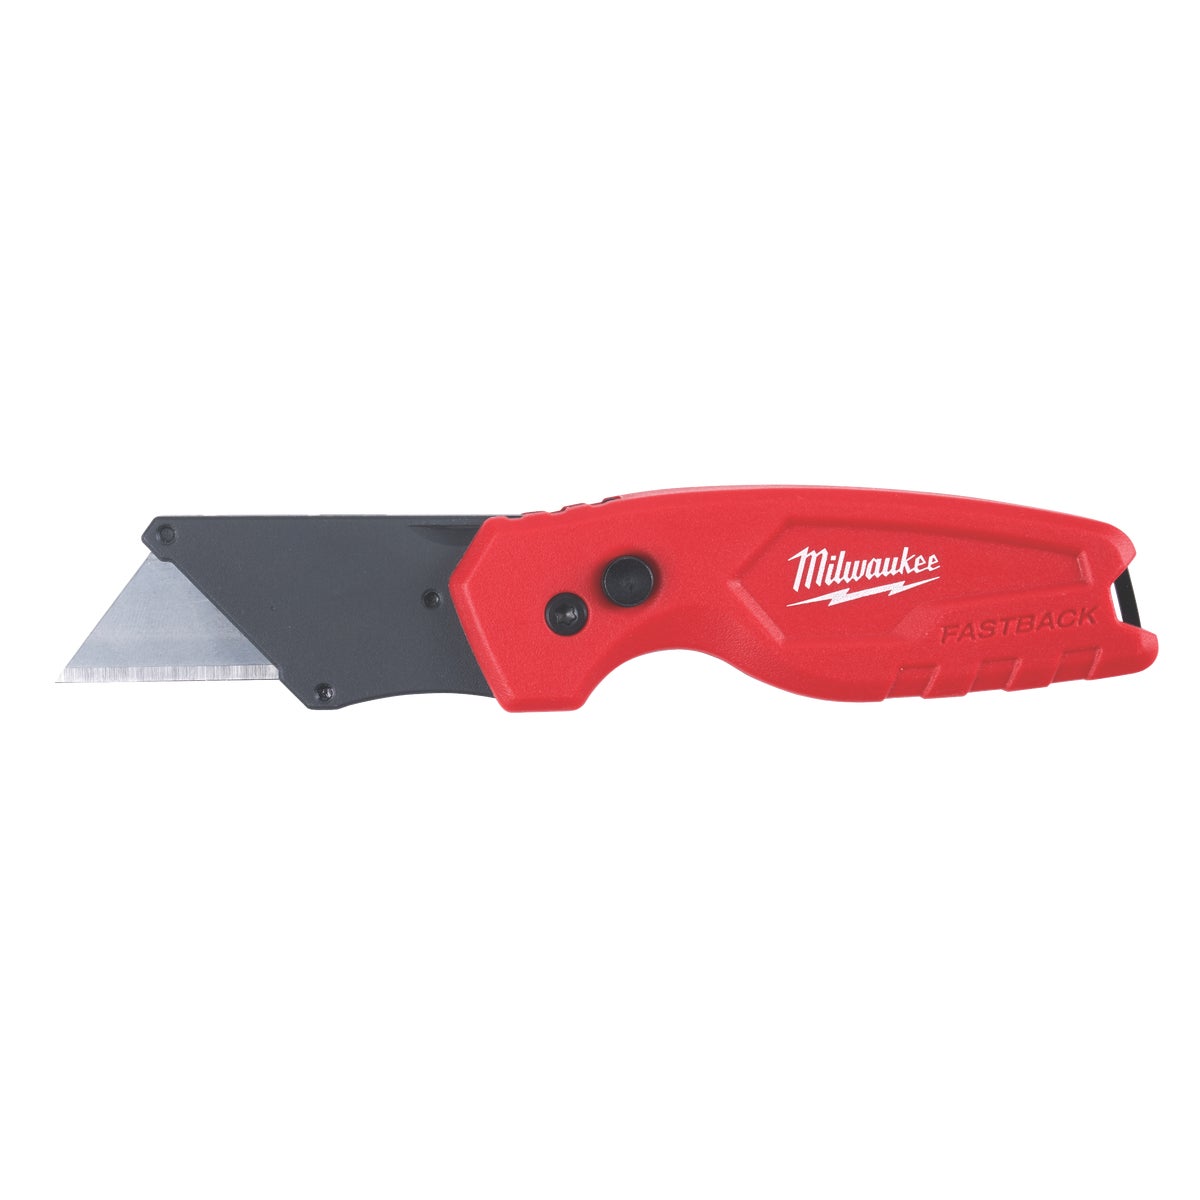 Item 333351, The FASTBACK Compact Folding Utility Knife features a press and flip 